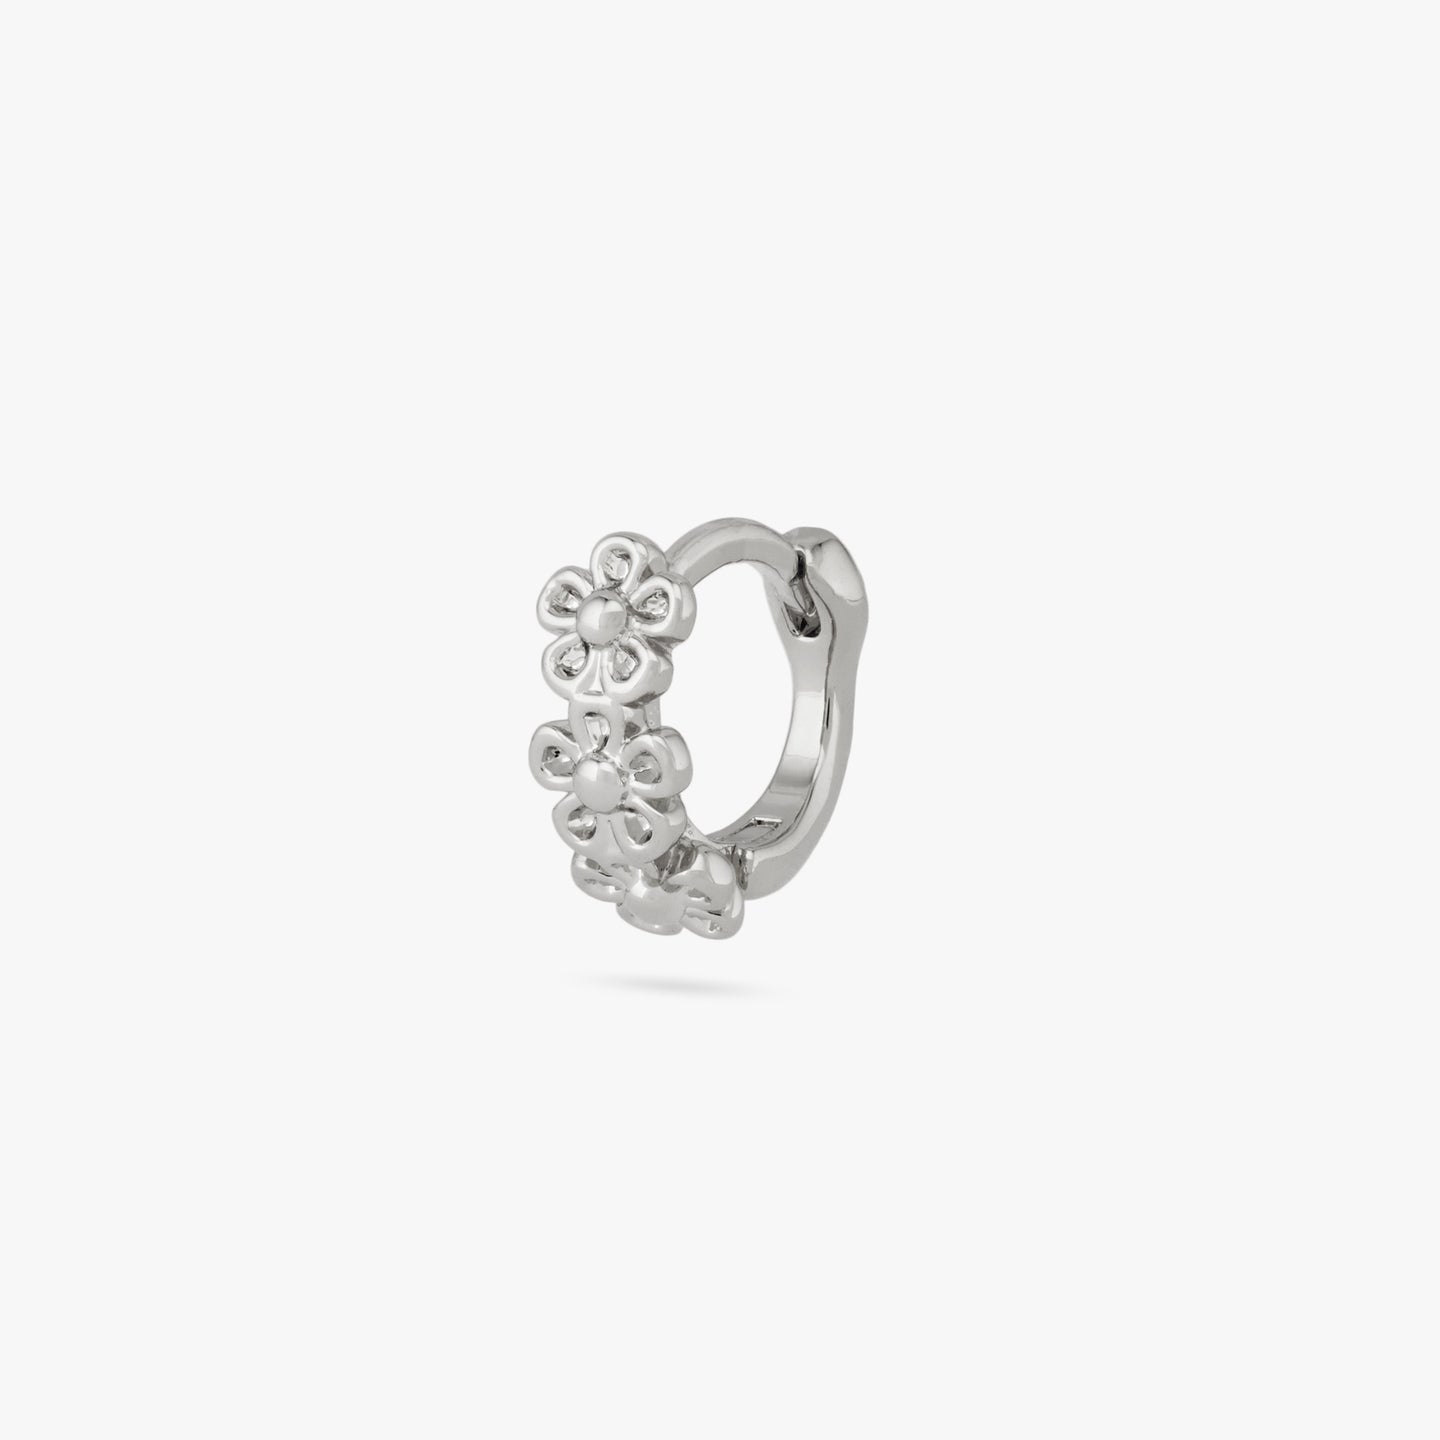 This is a micro huggie with three small silver daisy-shaped flowers color:null|silver